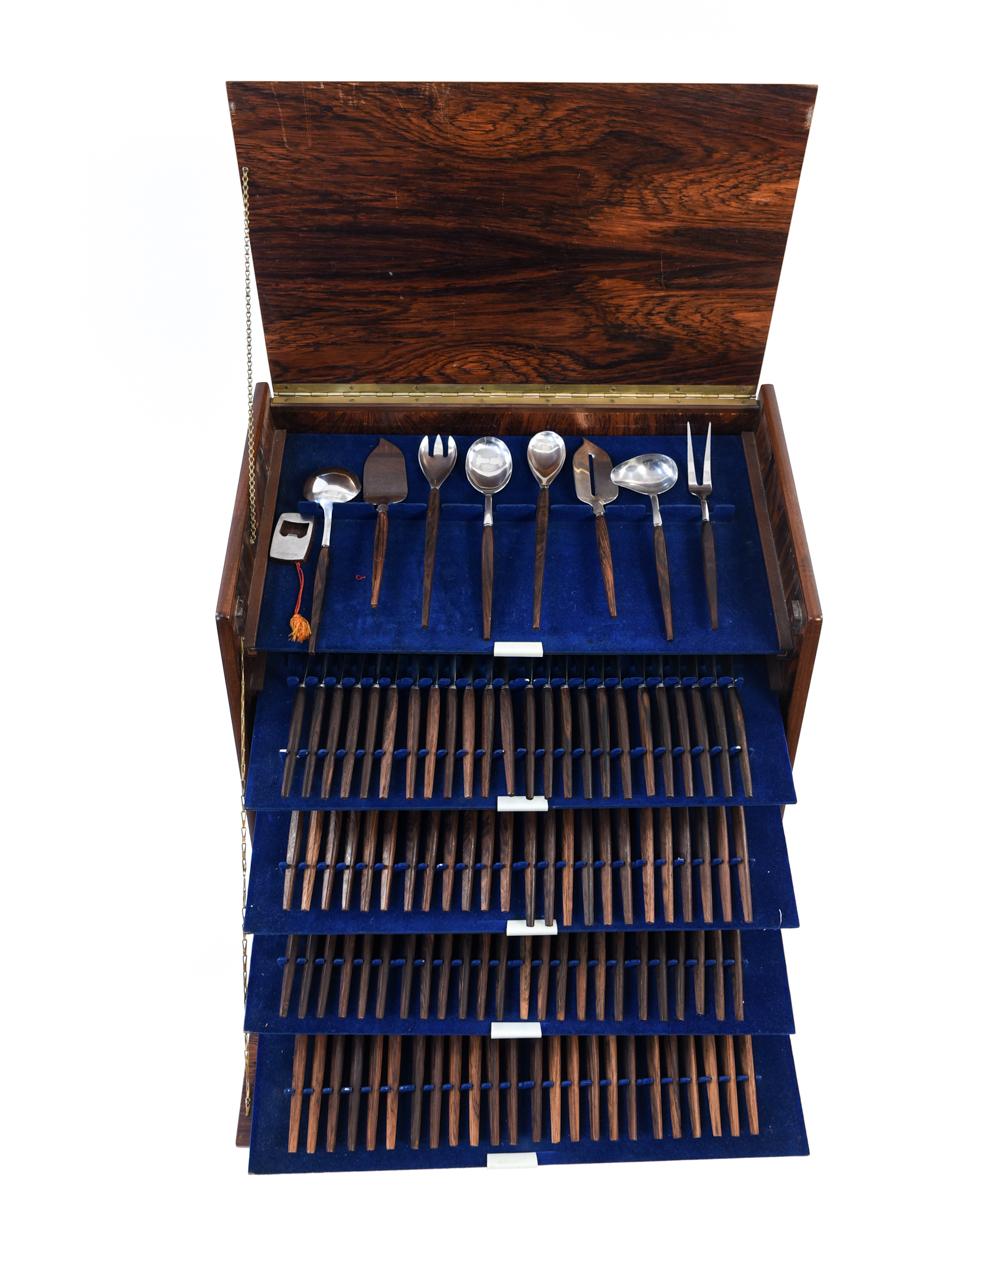 Stig Bolaget Malmo Swedish Rosewood Cutlery Cabinet with Cutlery Set 2